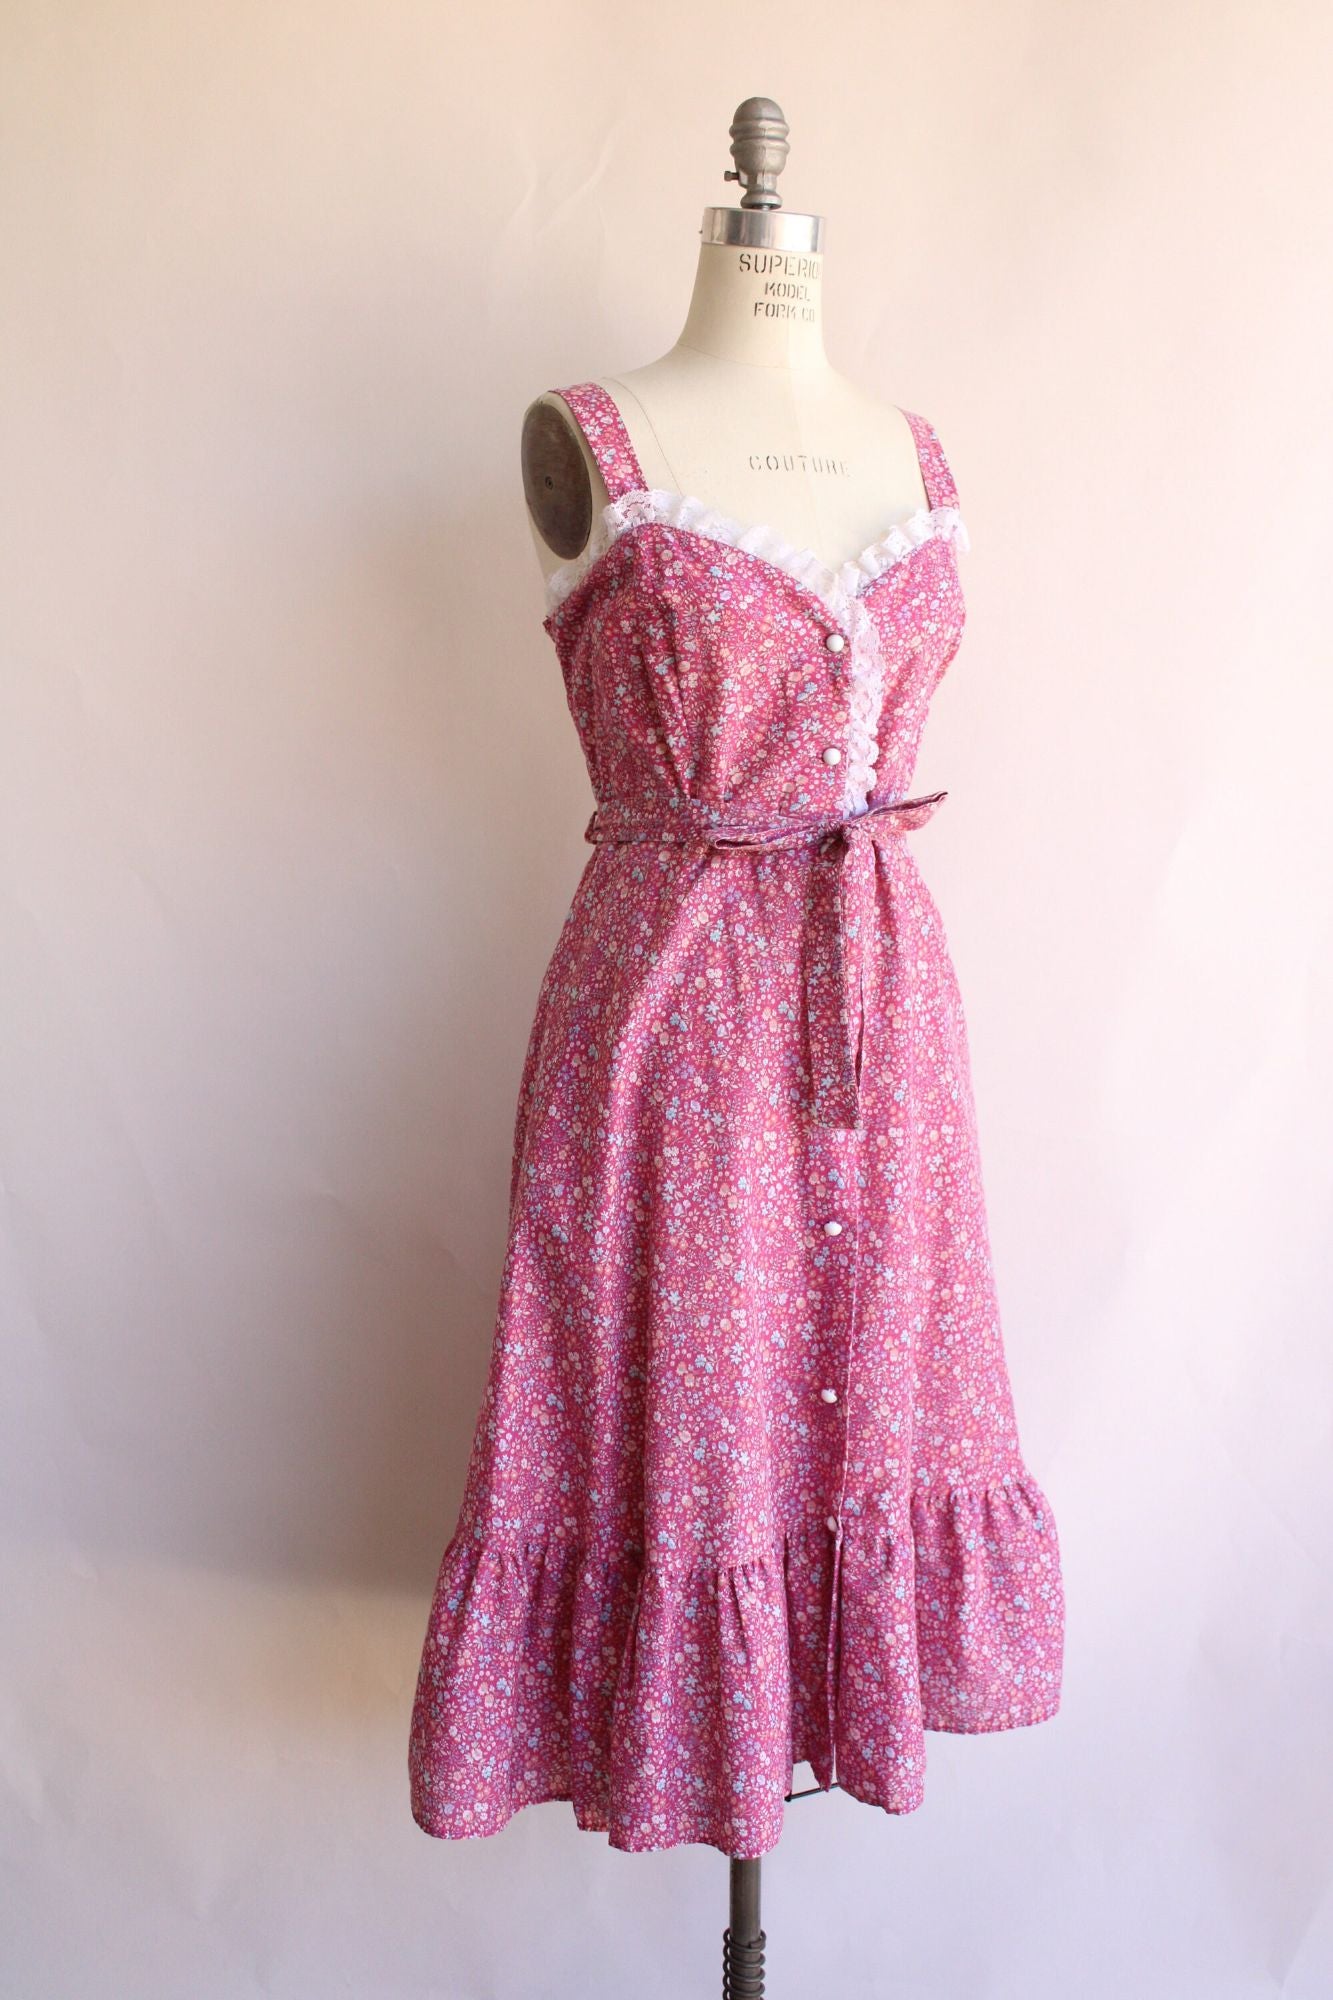 Vintage 1970s 1980s Pink Floral Calico Sundress with Pockets